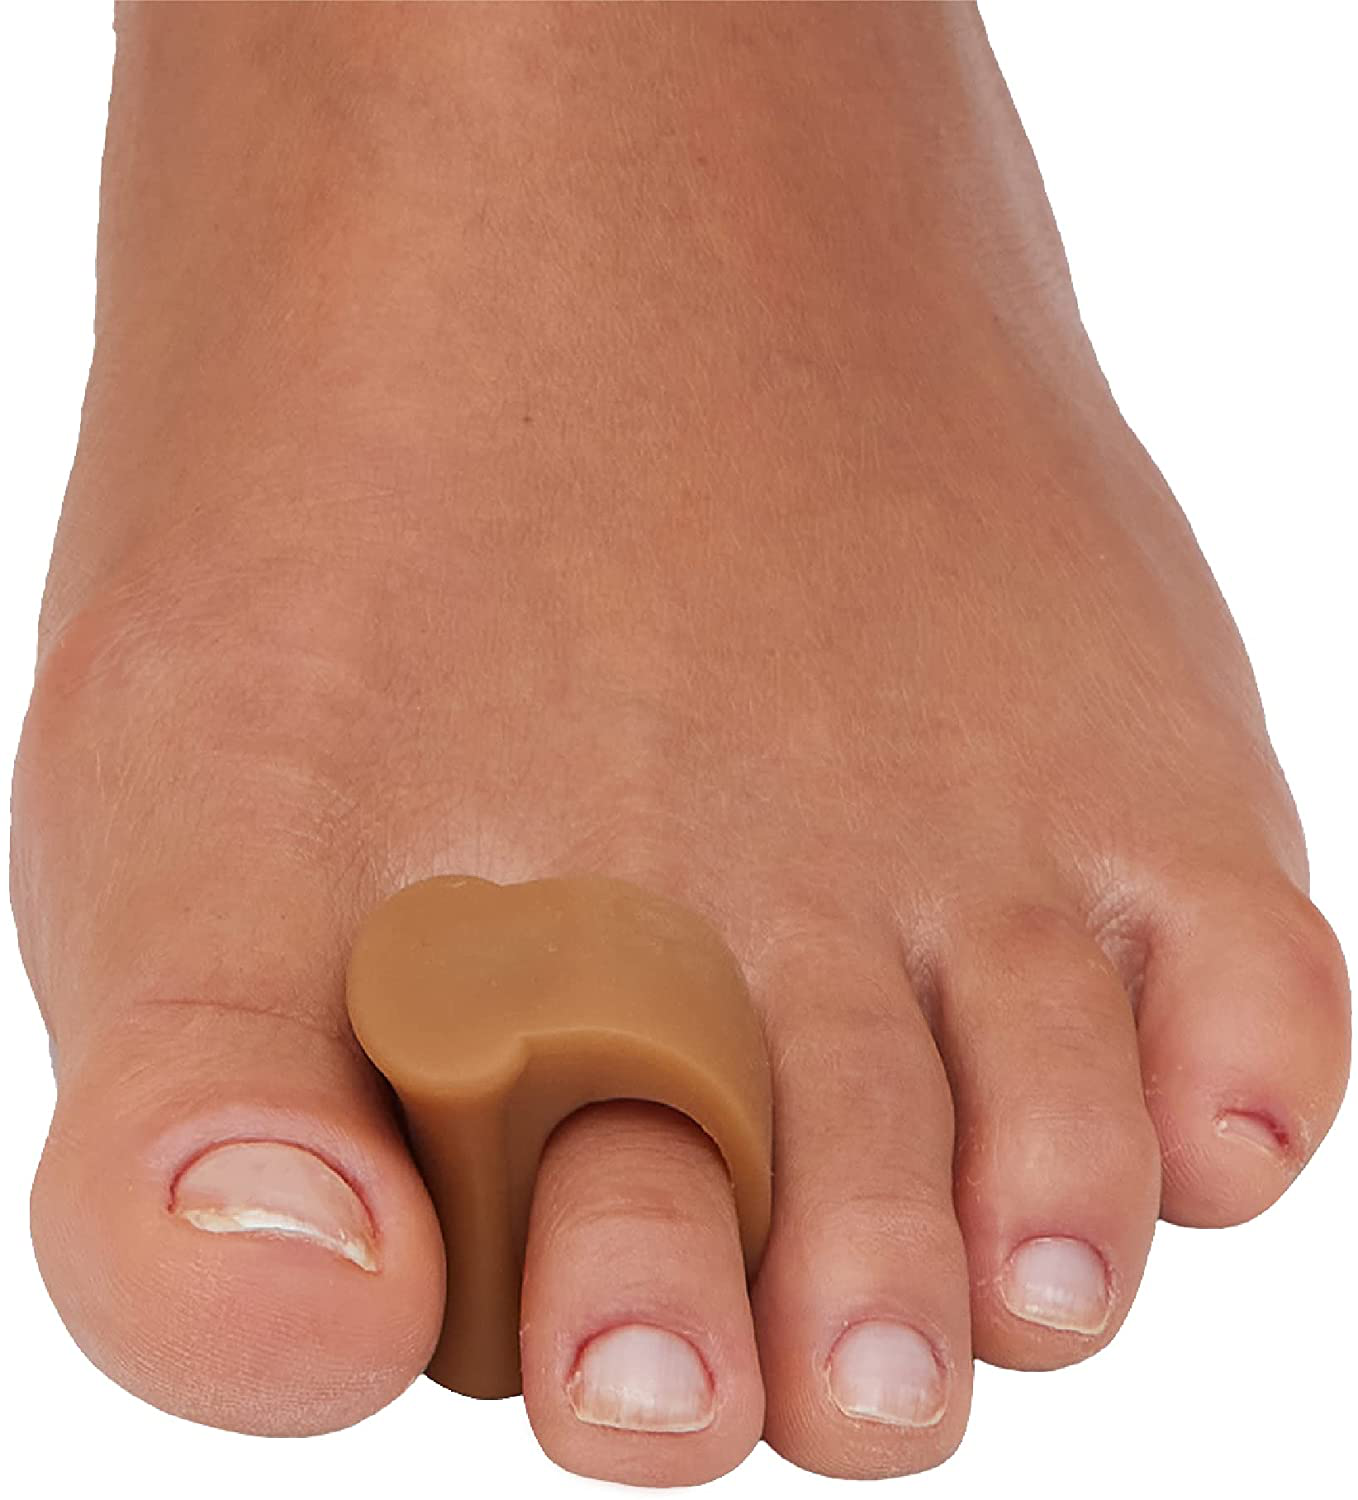 Zentoes Gel Toe Separators for Overlapping Toes, Bunions, Big Toe Alignment, Corrector and Spacer - 4 Pack (White)